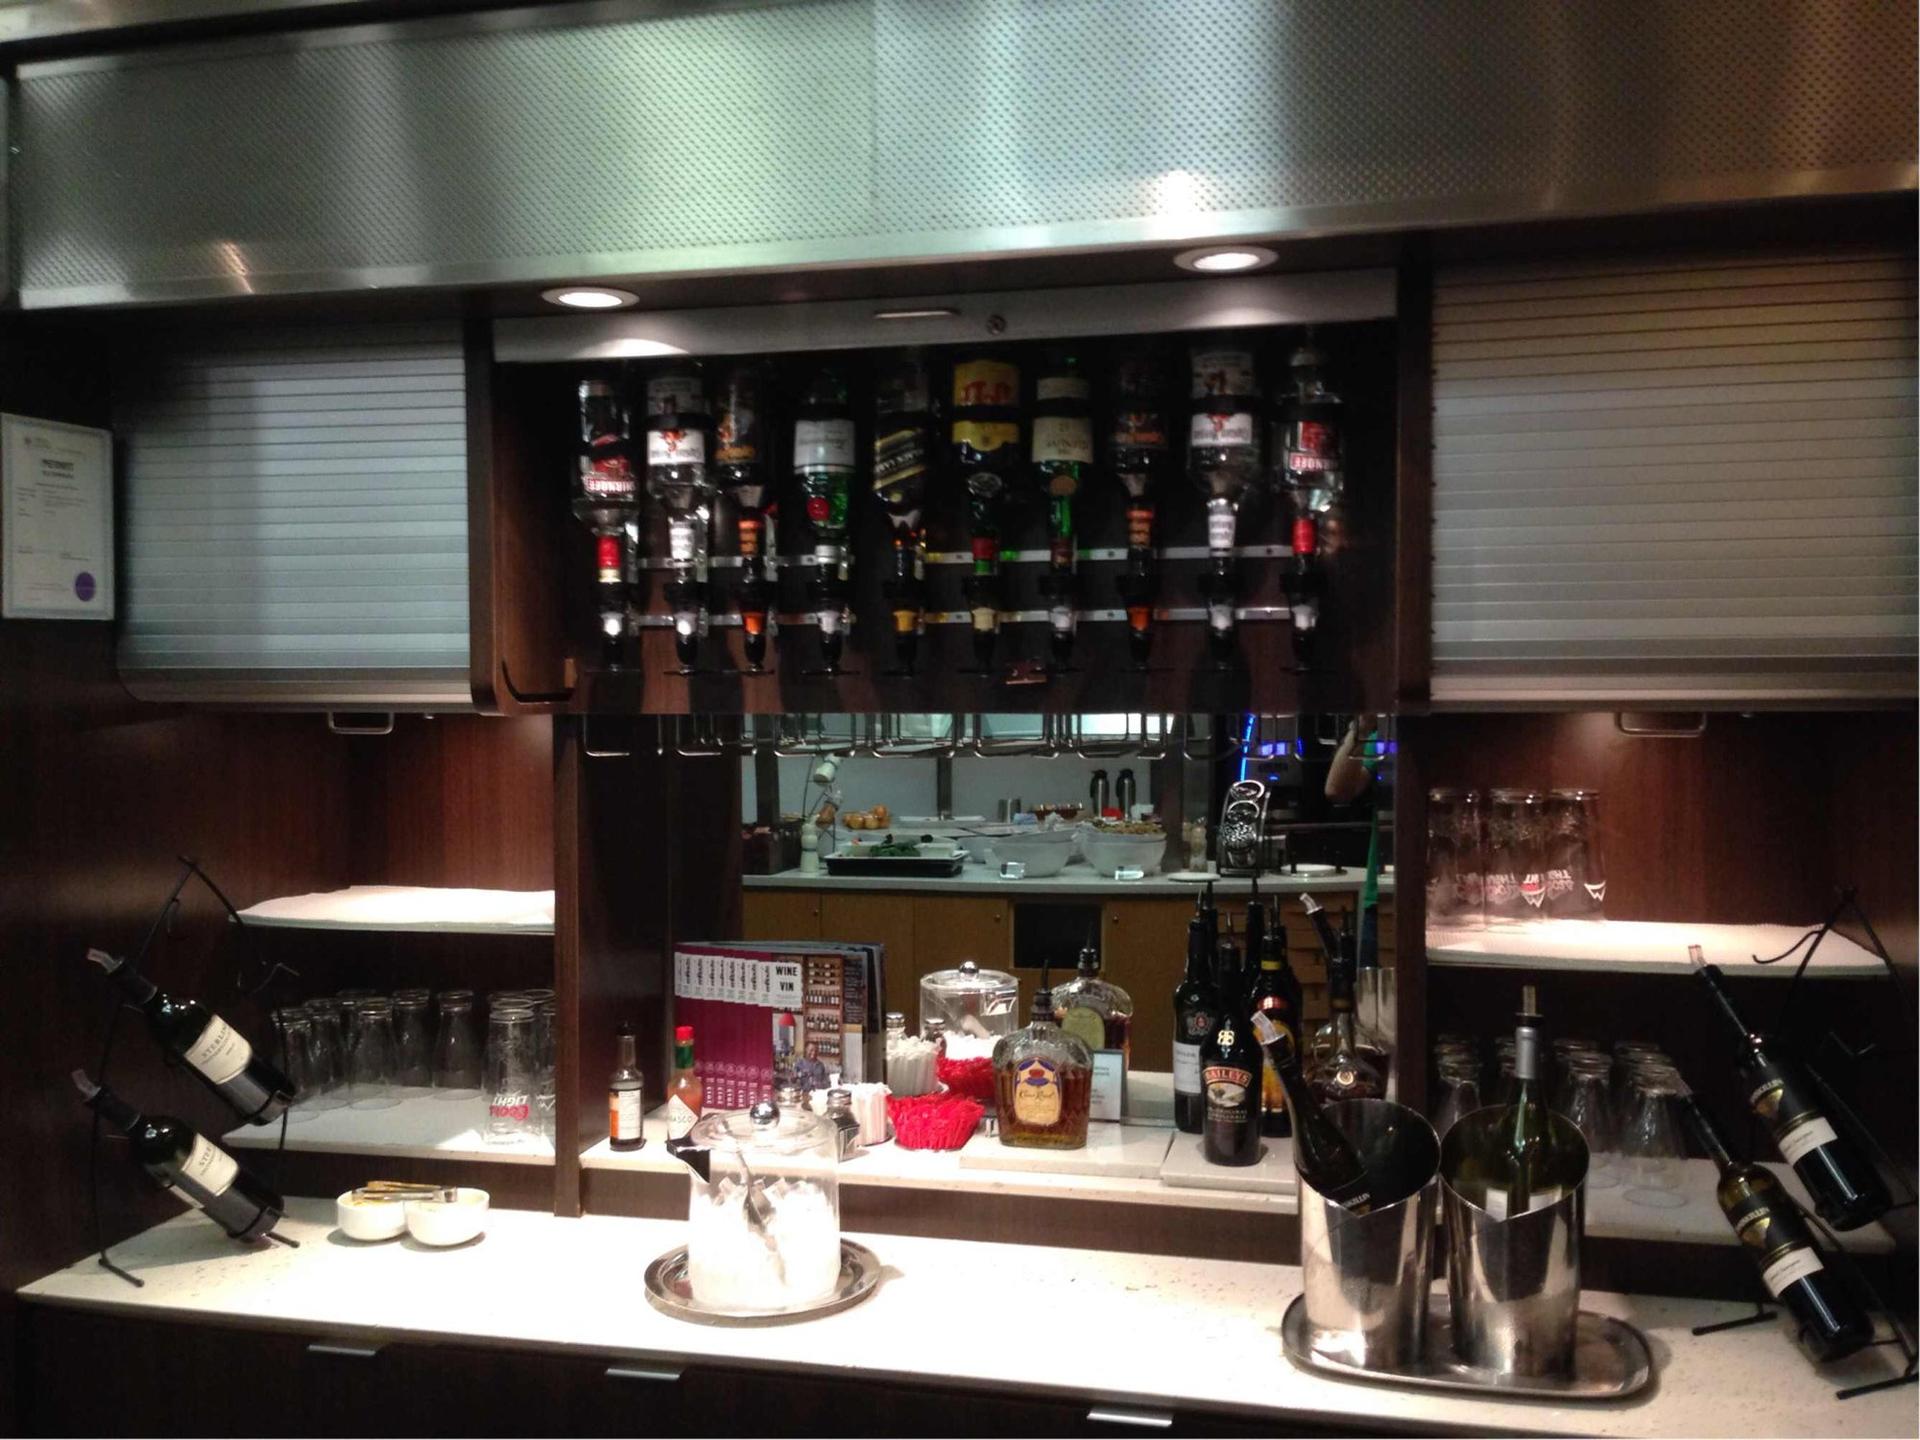 Air Canada Maple Leaf Lounge image 3 of 17